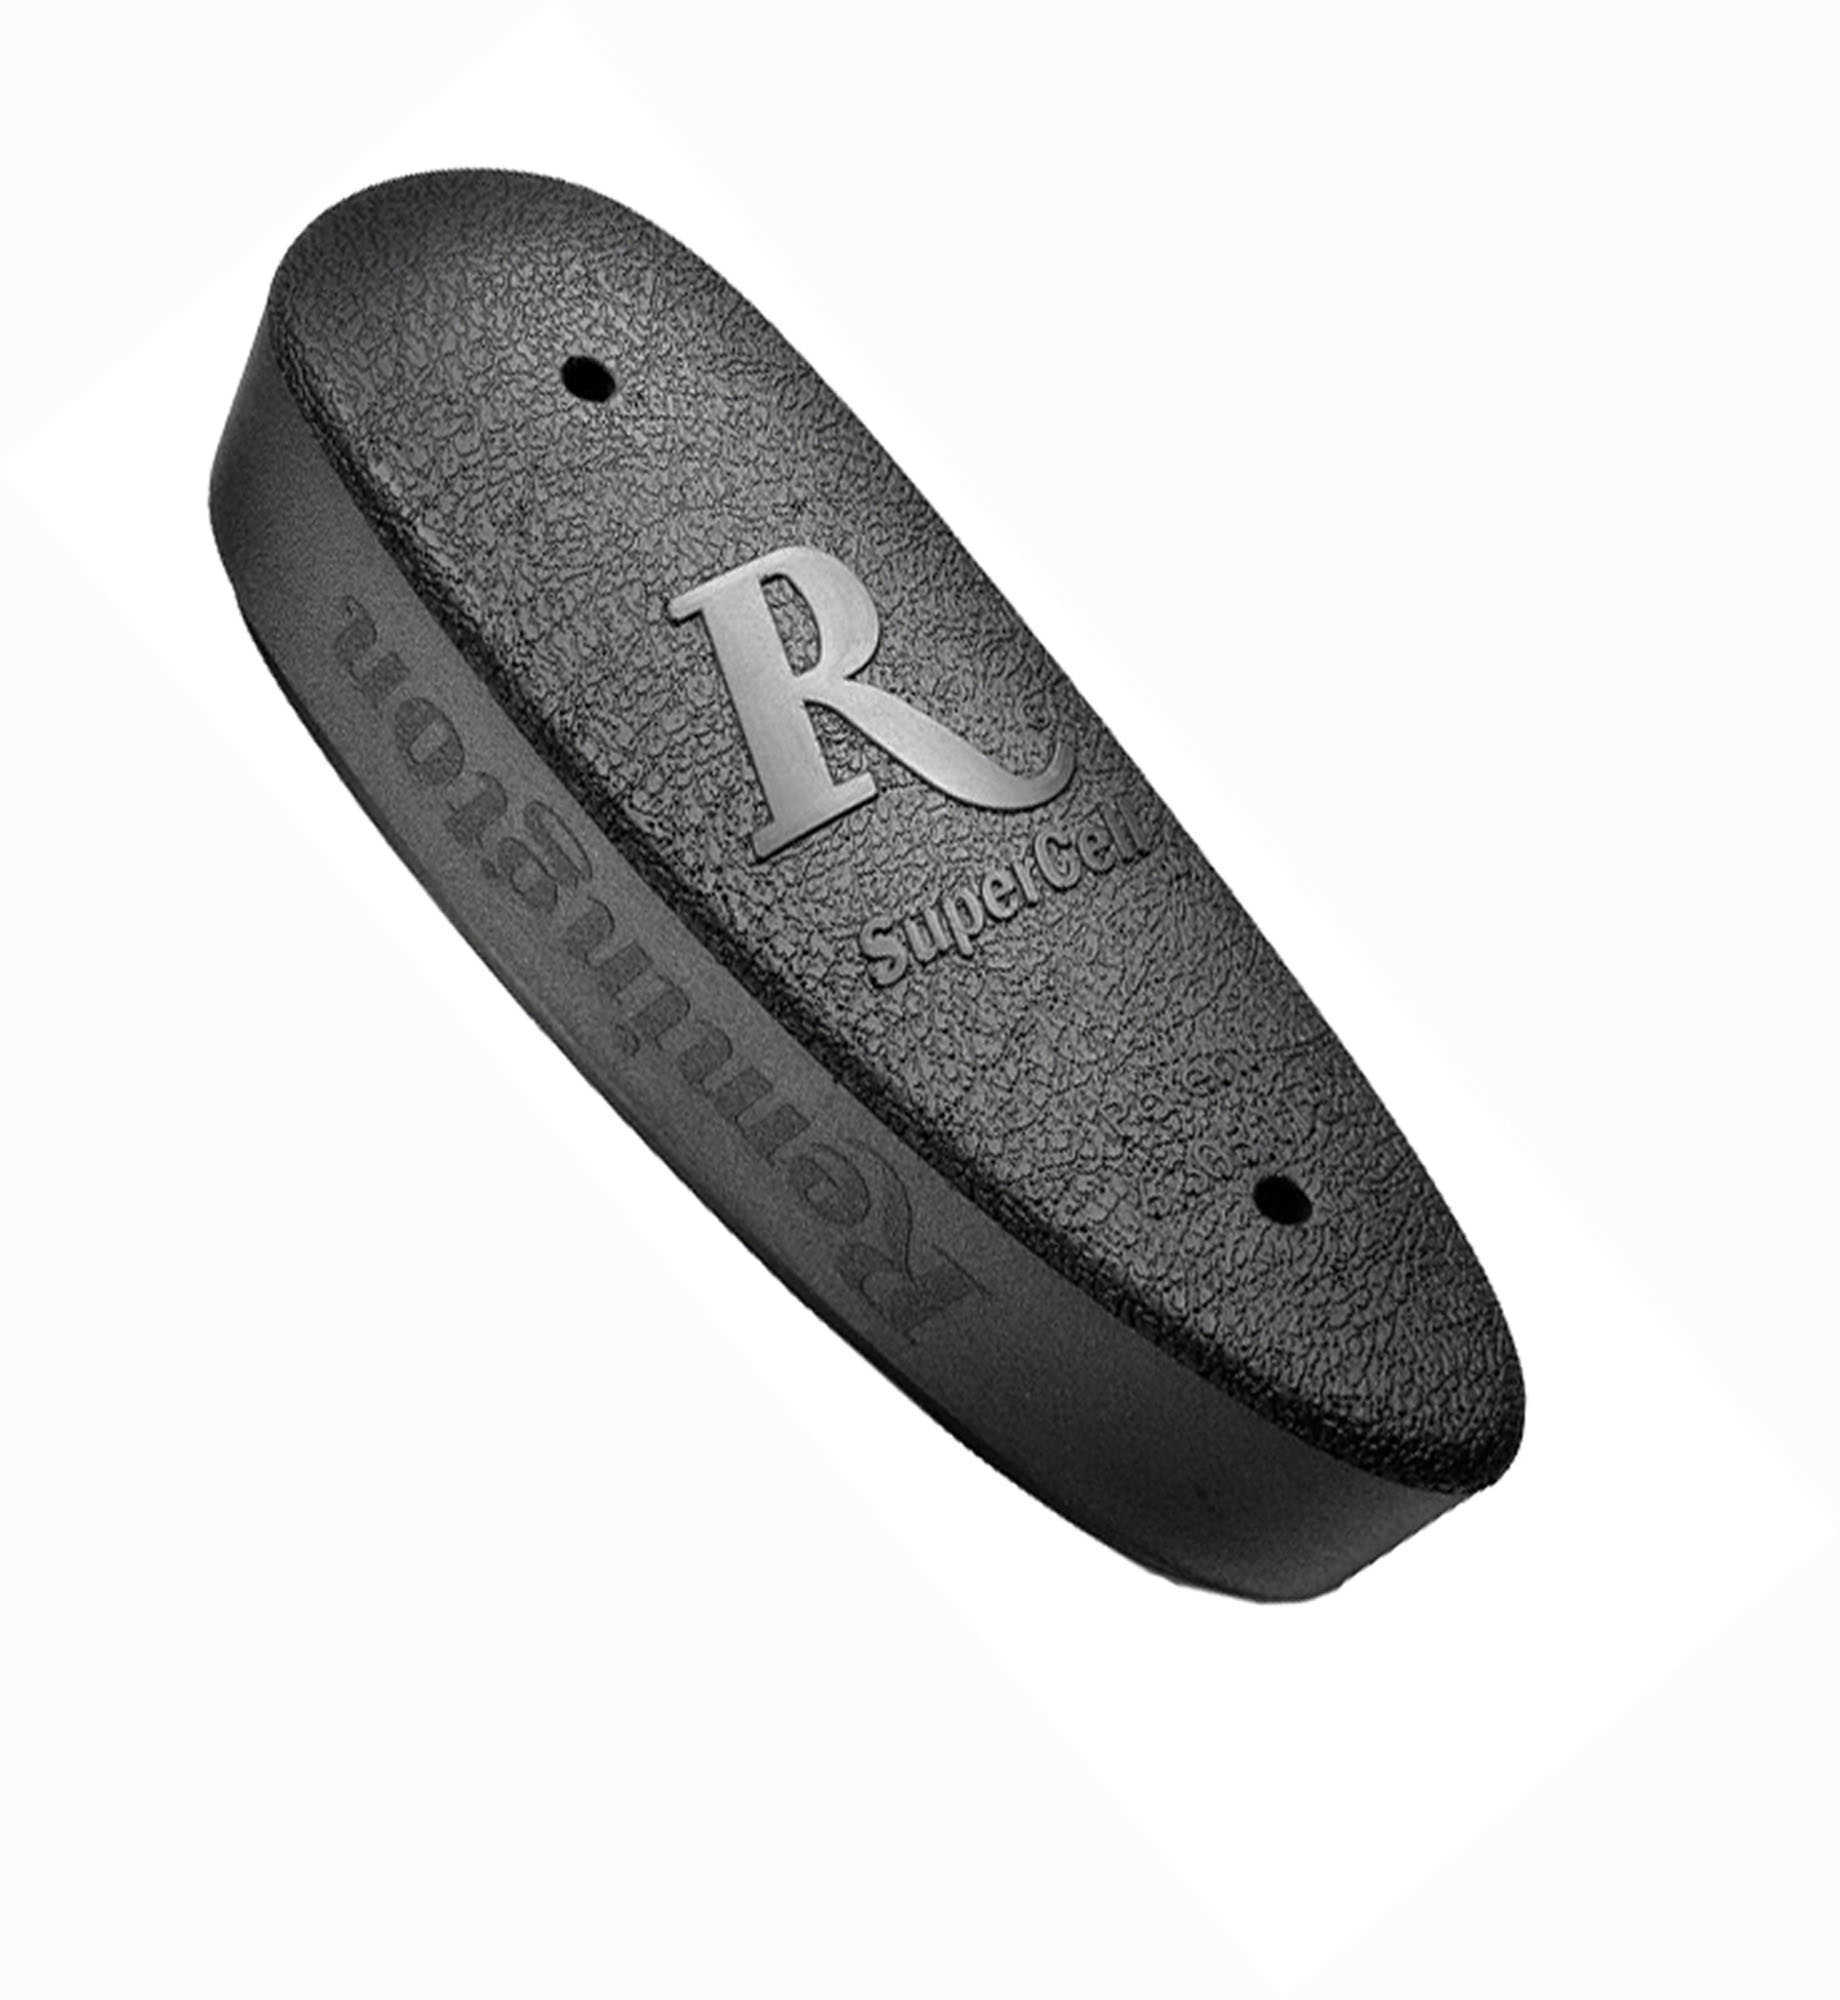 Remington Supercell Recoil Pad Cell 1" Black for 12 Gauge Shotguns with Wood Stocks